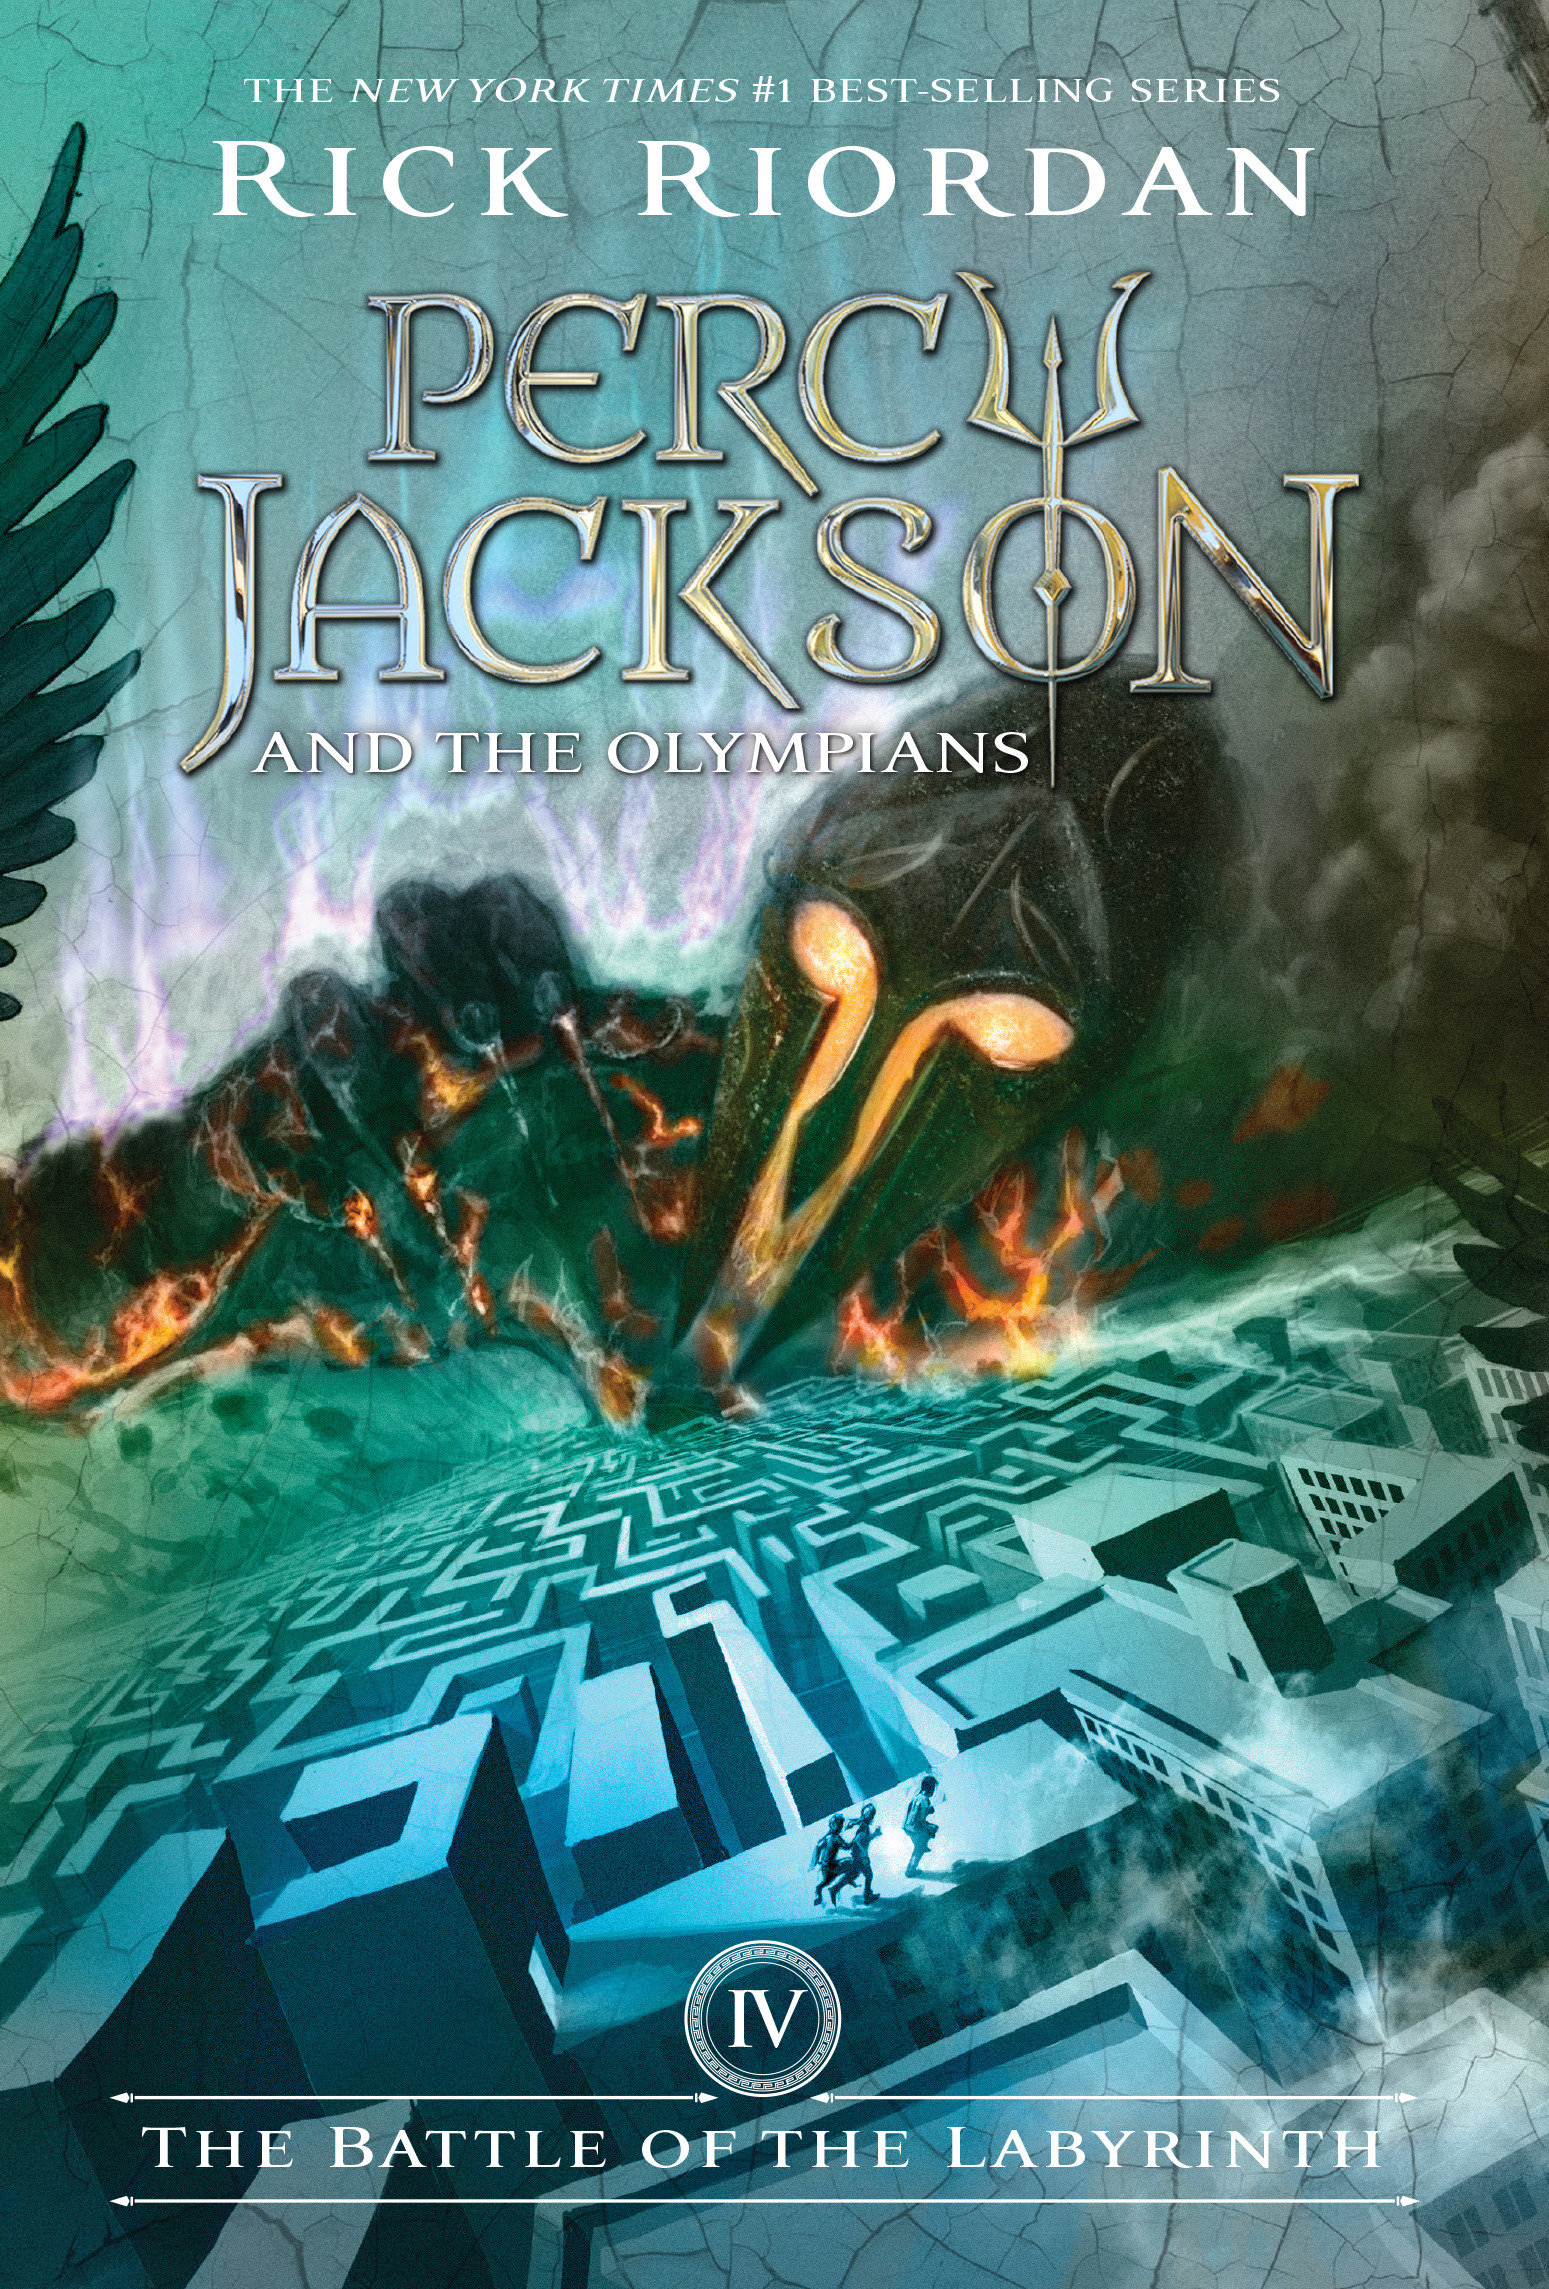 Percy Jackson and the Olympians Hardcover Book Volume 4 The Battle of the Labyrinth